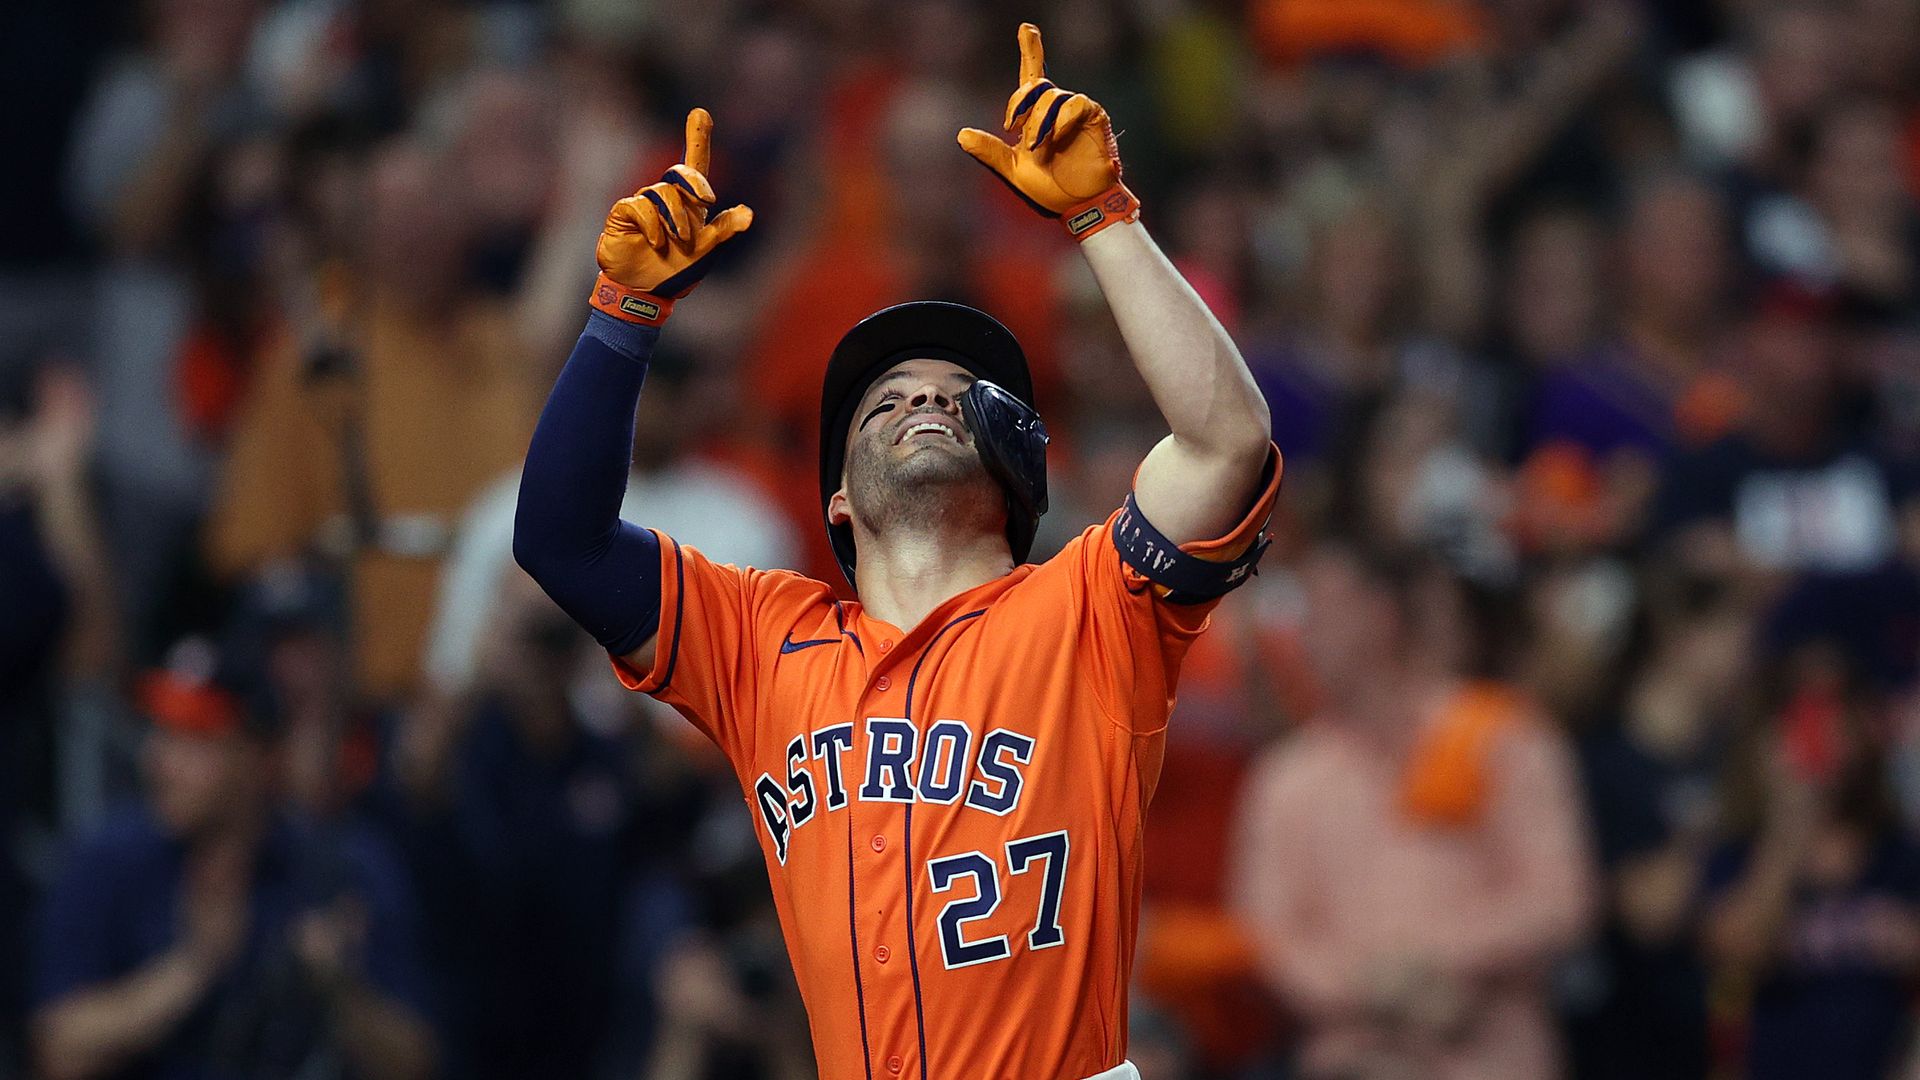 Houston's Jose Altuve wearing an orange jersey celebrates by pointing his fingers in the air. 